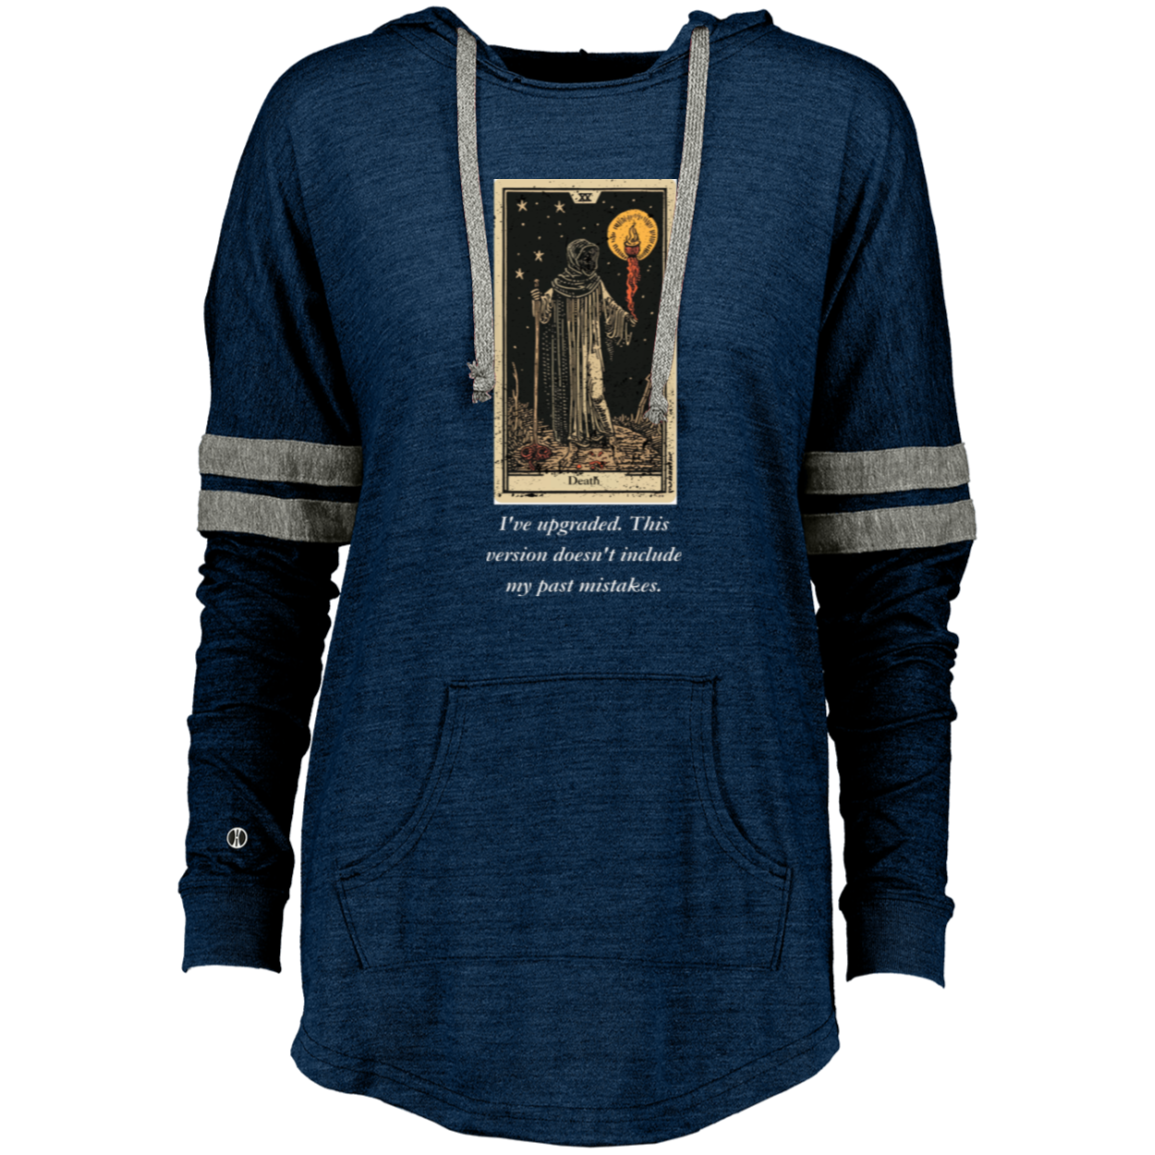 Funny death women's navy tarot card hoodie pullover from BLK Moon Shop